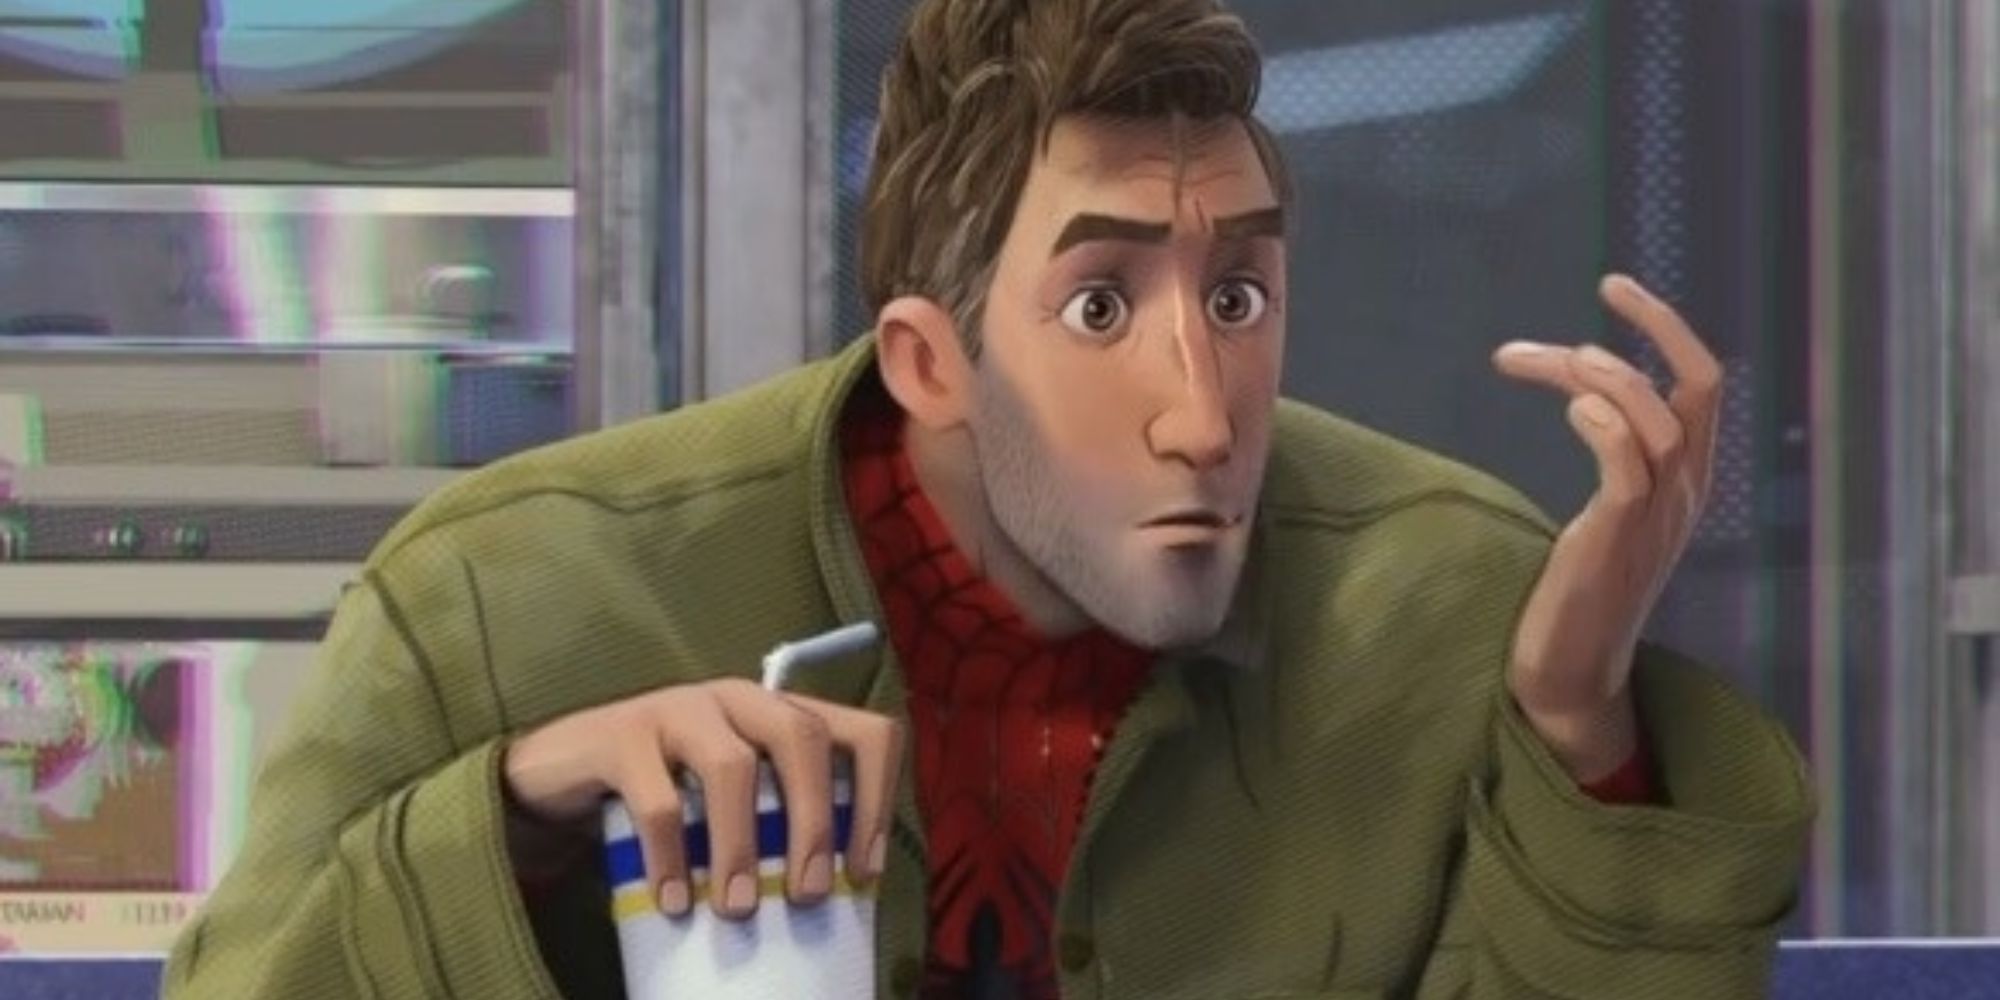 Peter B. Parker looking confused while holding a soda in Spider-Man: Into the Spider-Verse